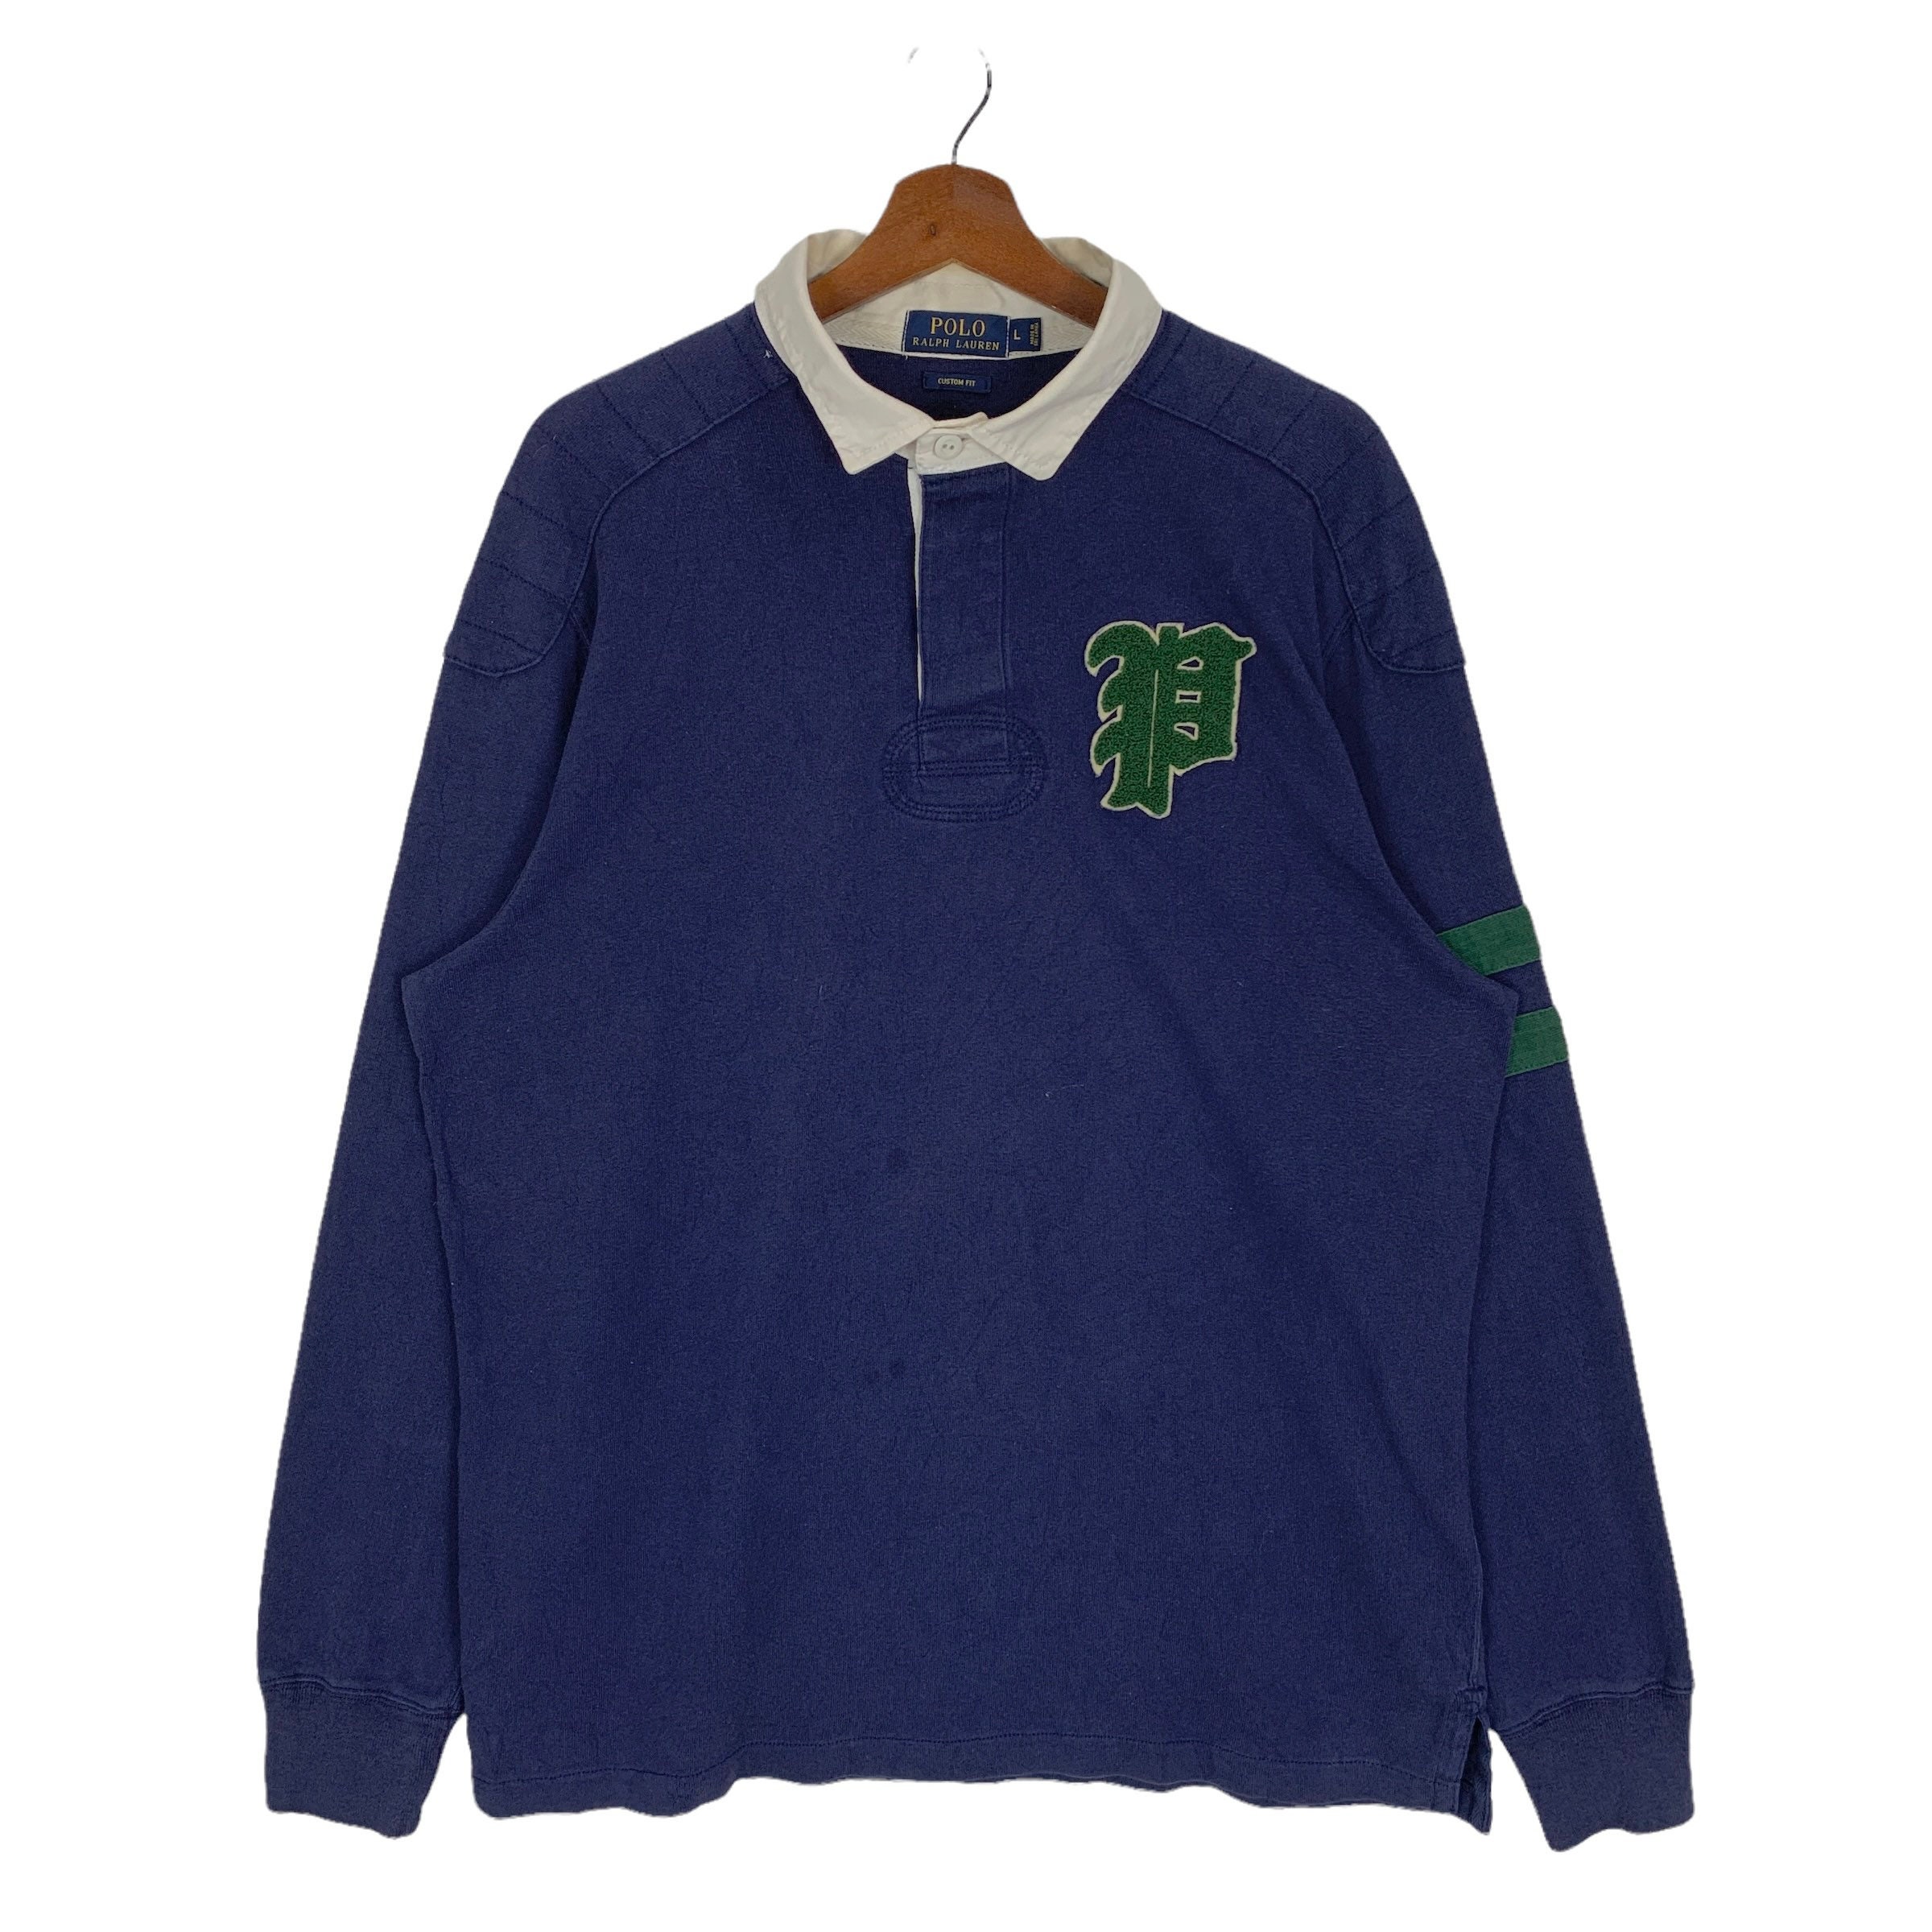 Vintage Polo Ralph Lauren 67 Rugby Shirt Long Sleeve Polo Shirt Size ...